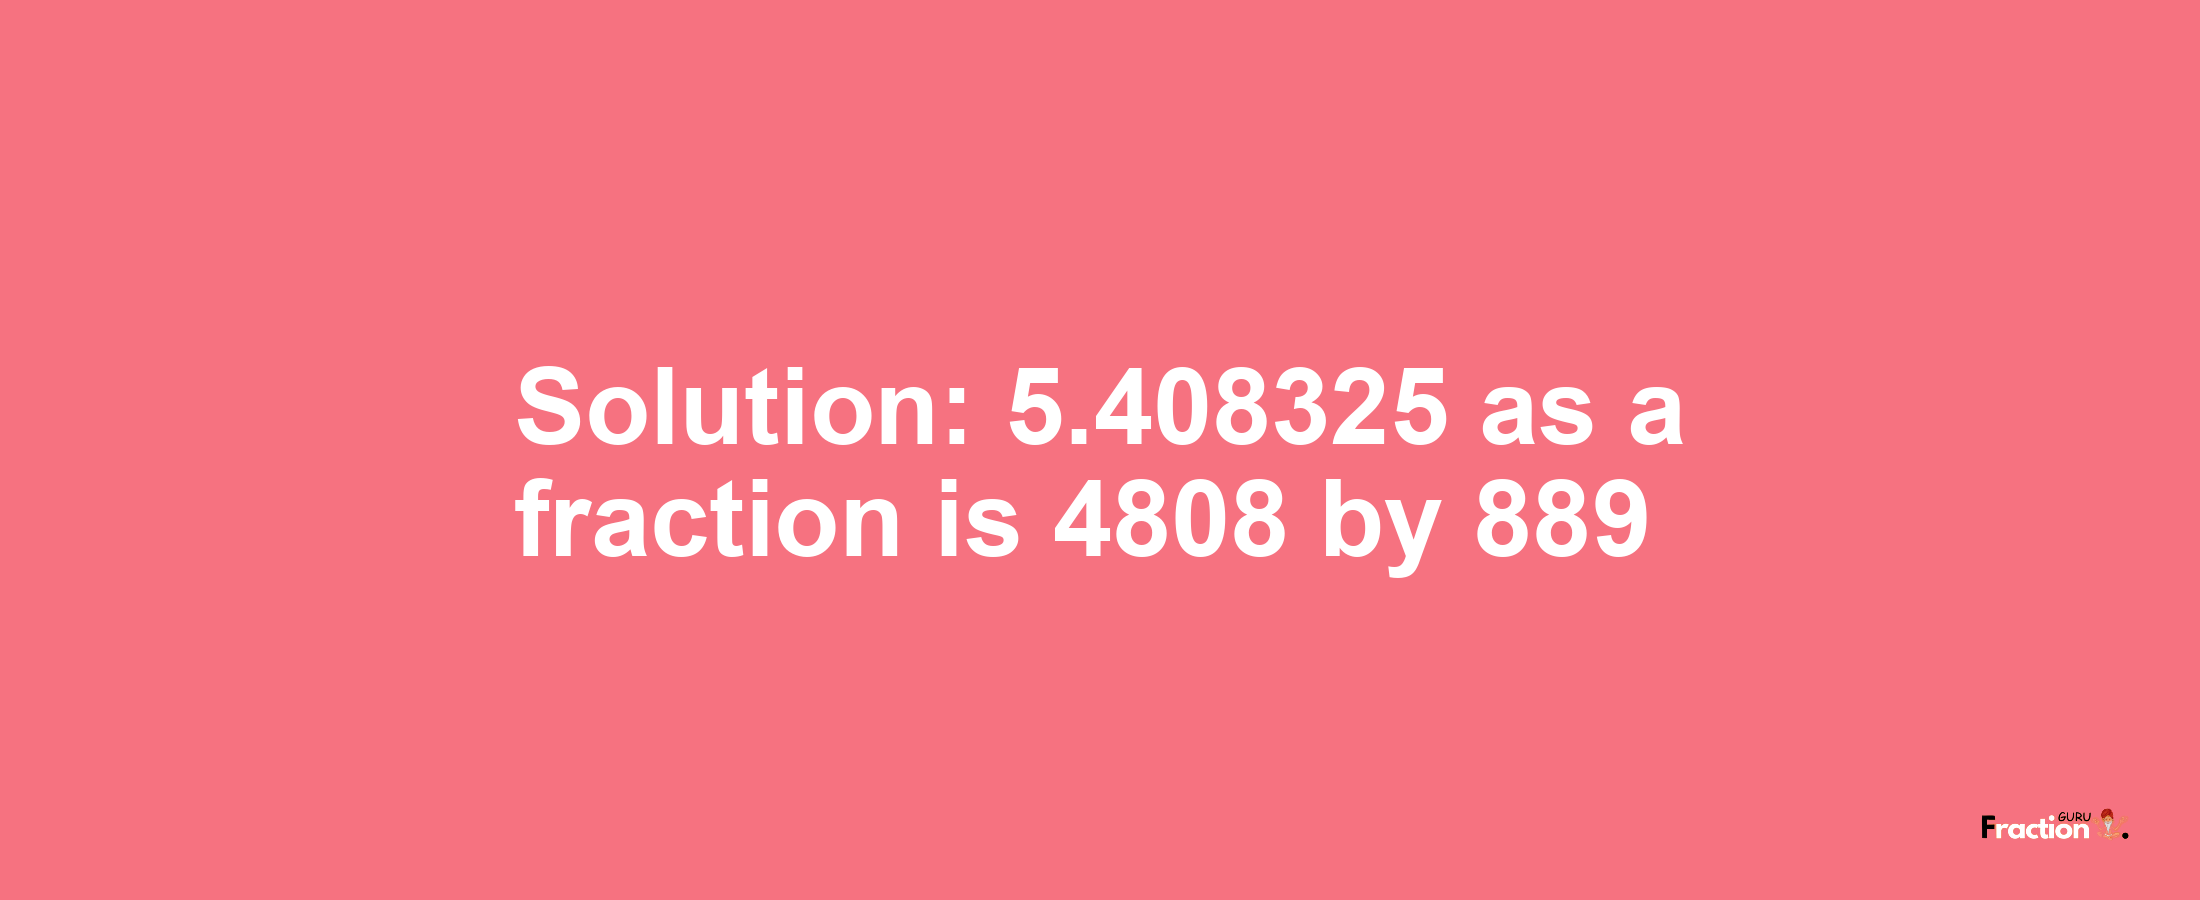 Solution:5.408325 as a fraction is 4808/889